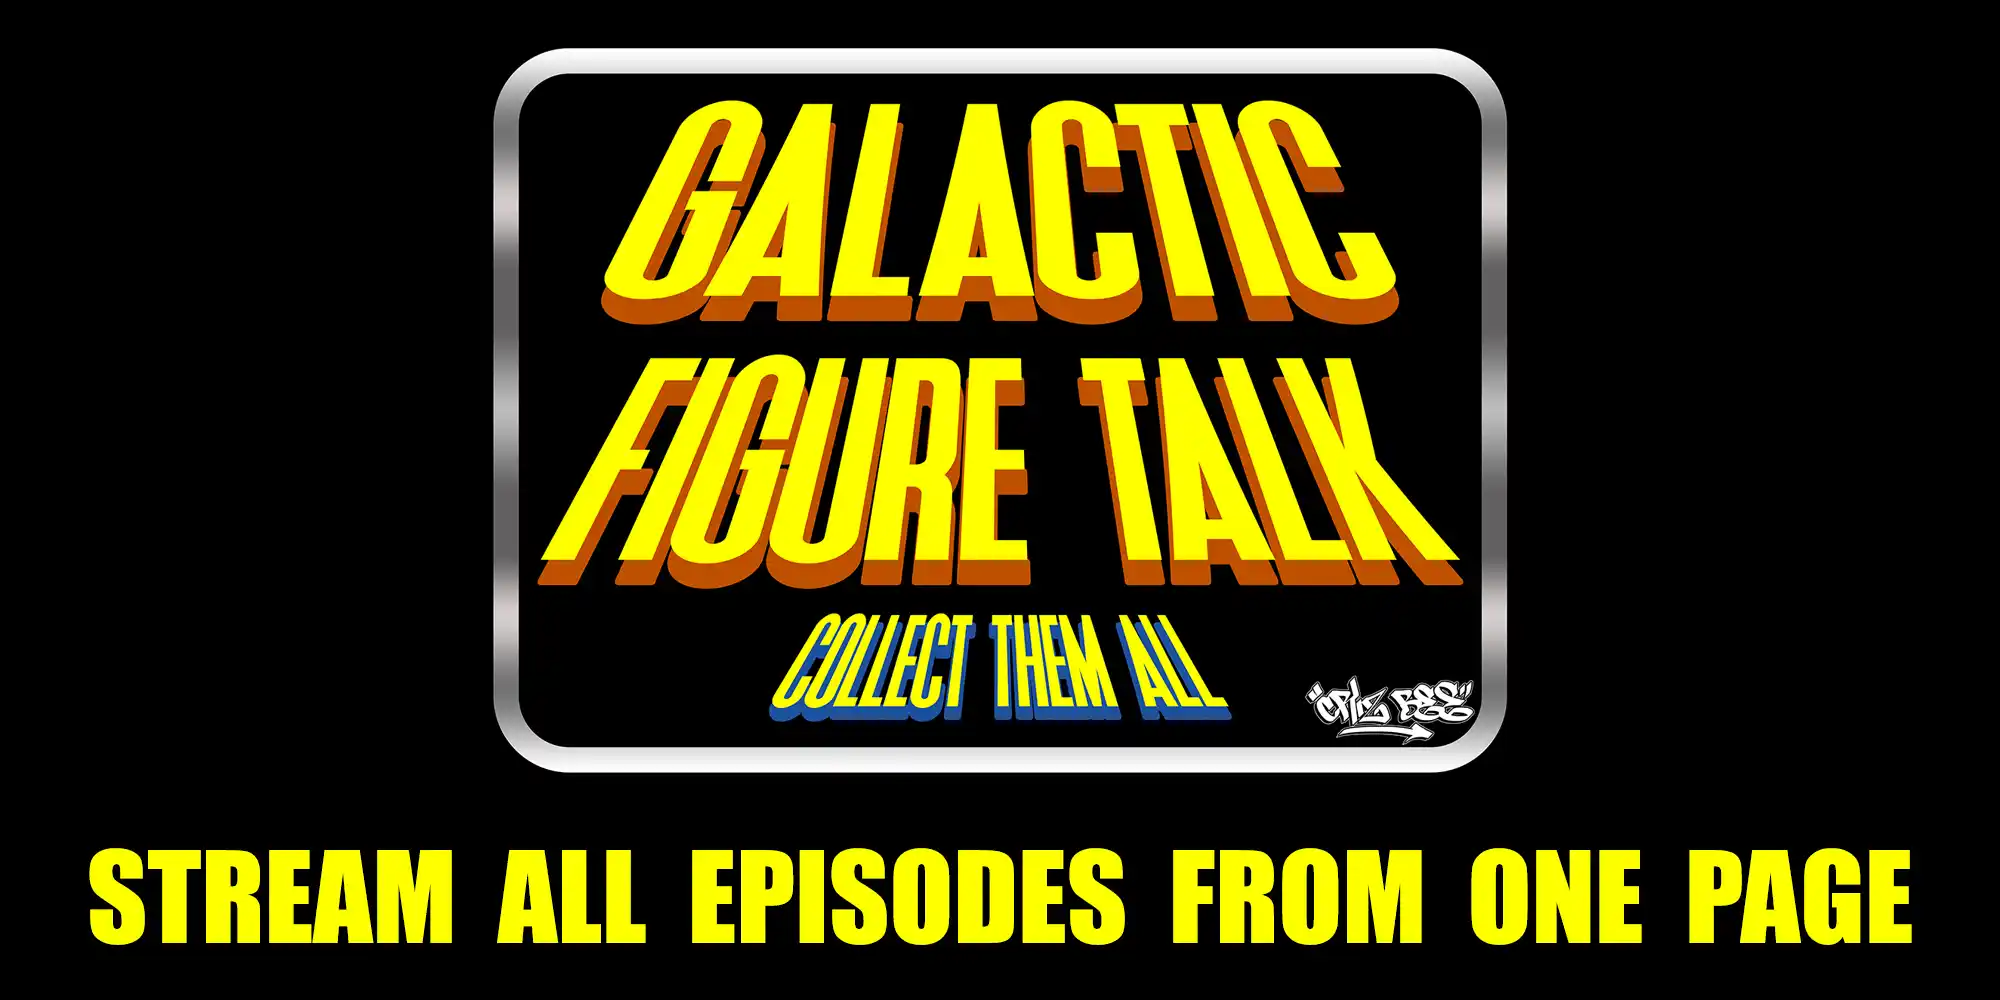 GFT - Galactic Figure Talk - Stream All Episodes From One Page